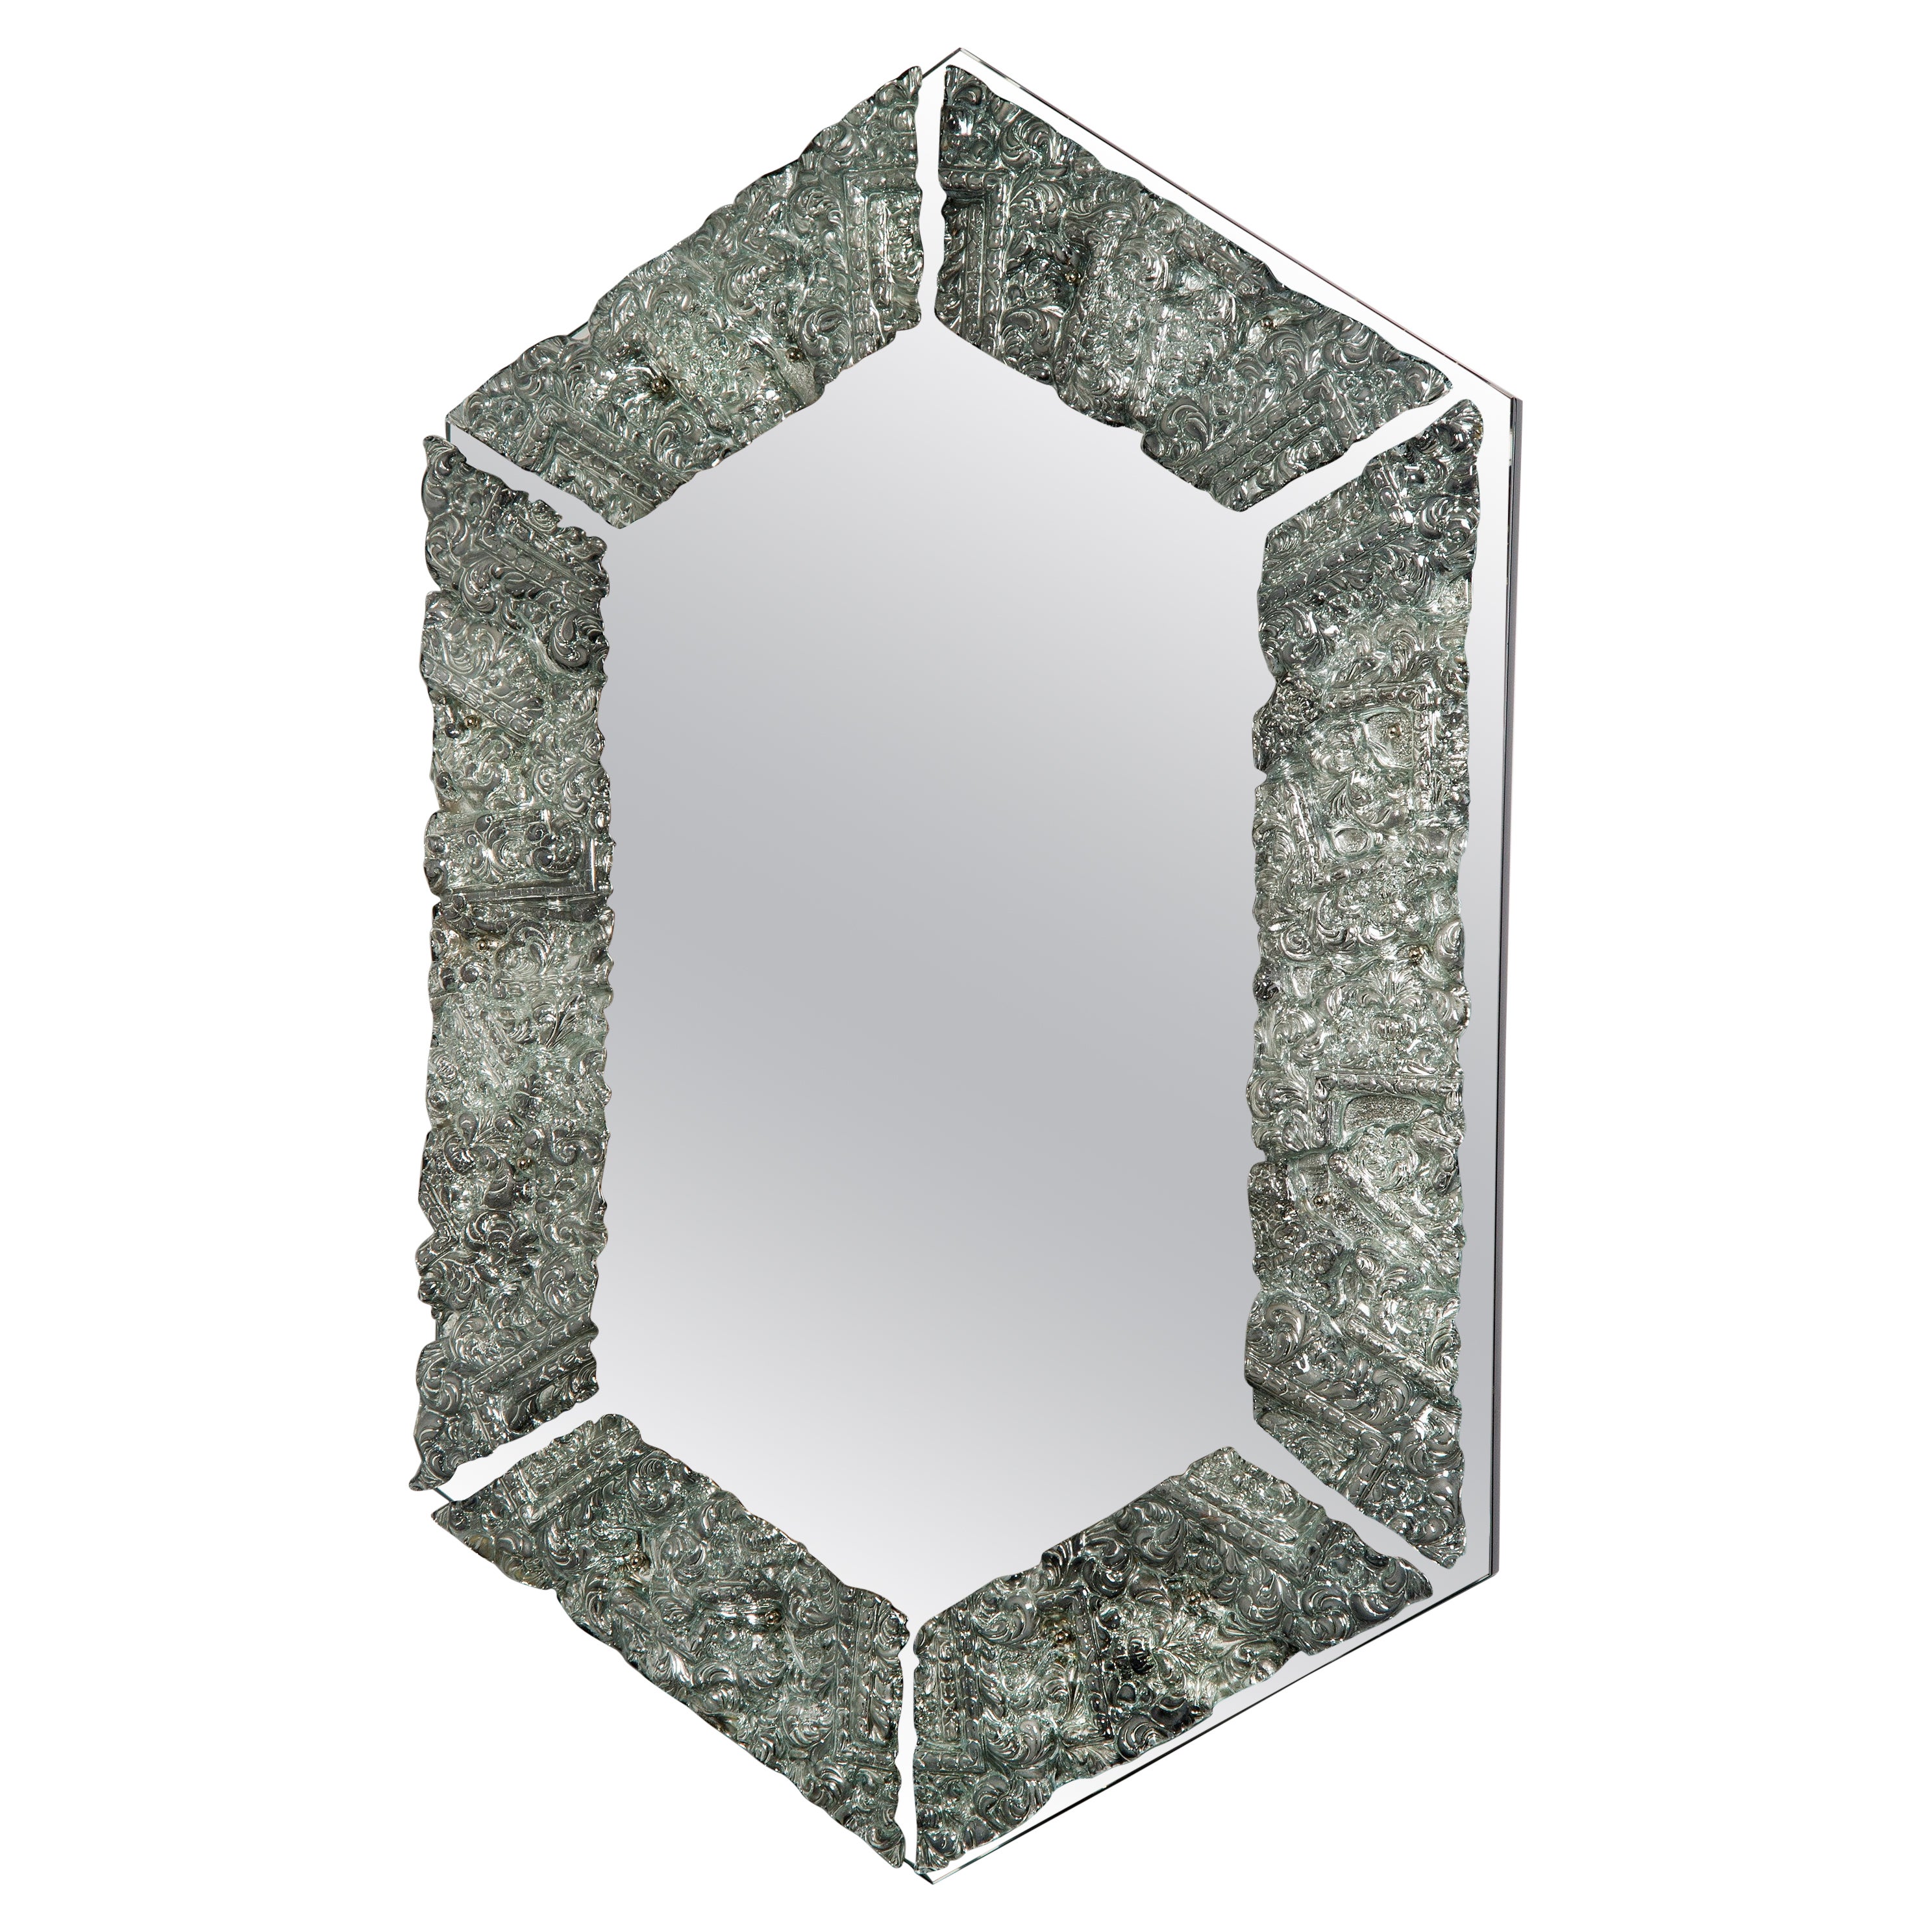  Framed Mirror, a Silver Ornate Handcrafted Fused Glass Mirror by Brett Manley